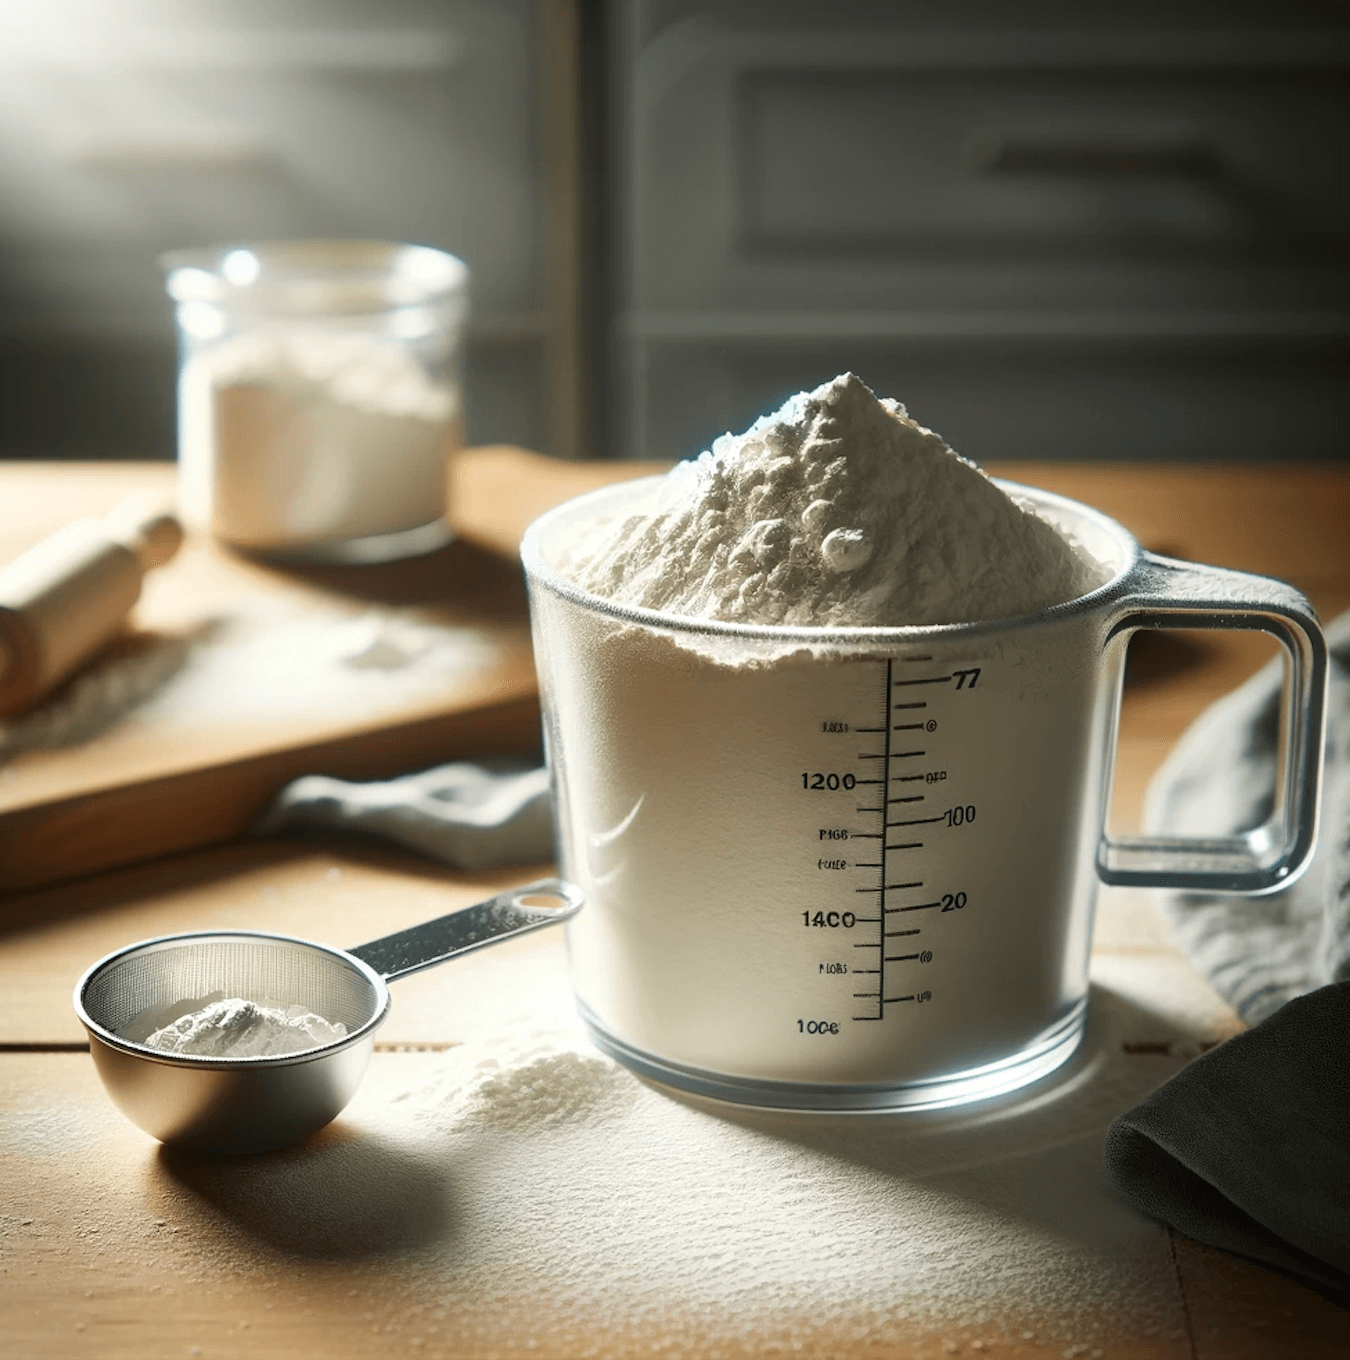 150 grams of flour in cups